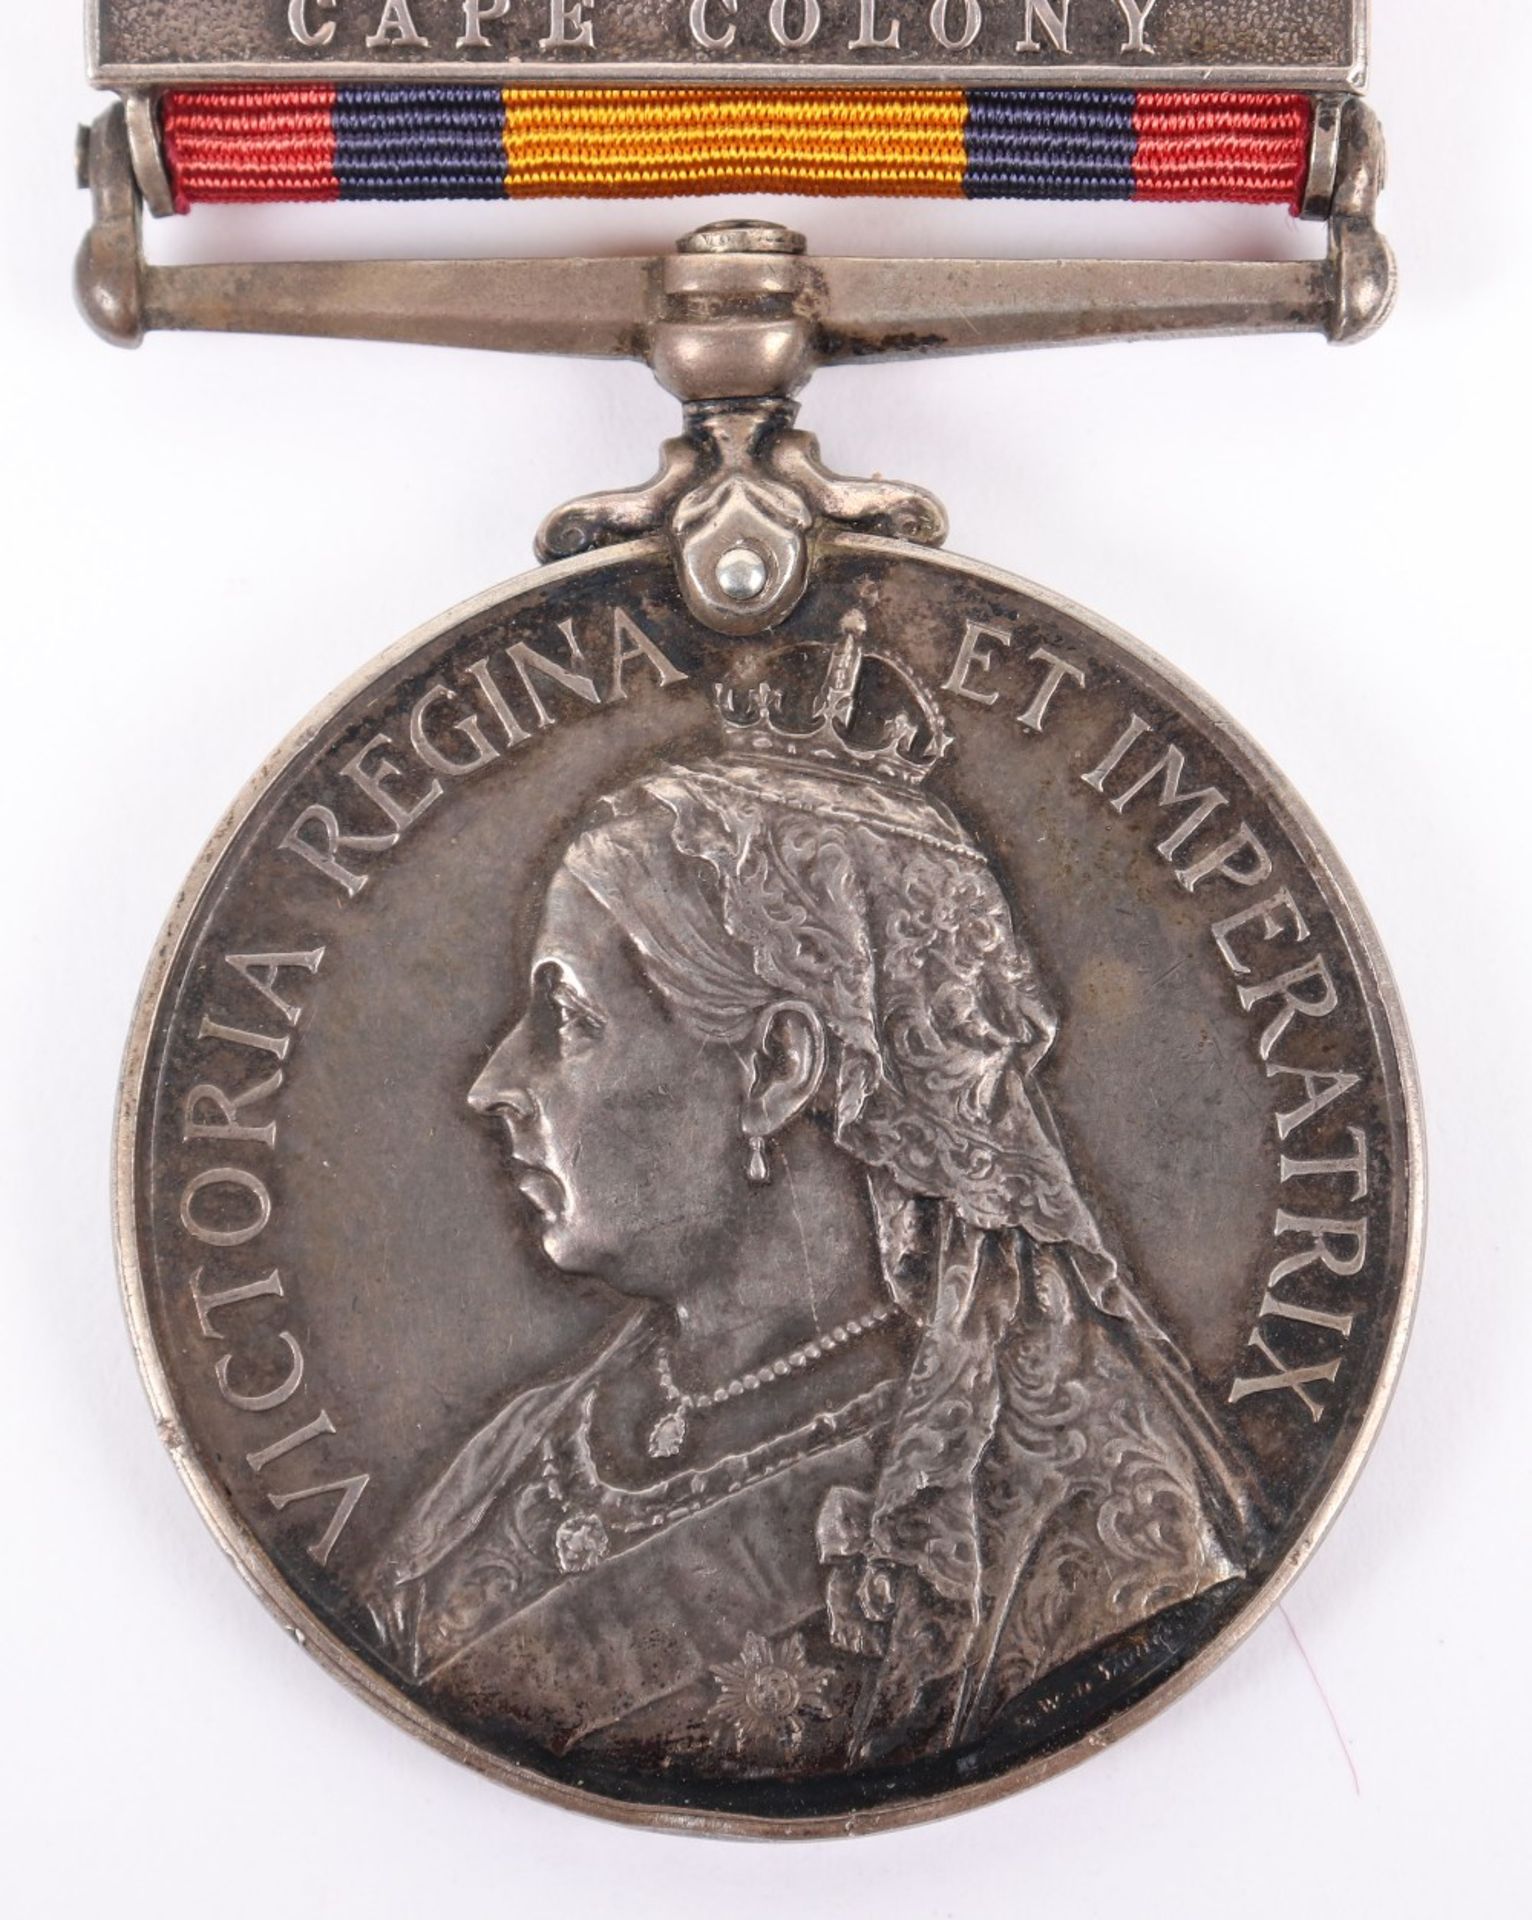 Queens South Africa Medal 121st (Younghusband’s Horse) Company 26th Battalion Imperial Yeomanry - Image 3 of 5